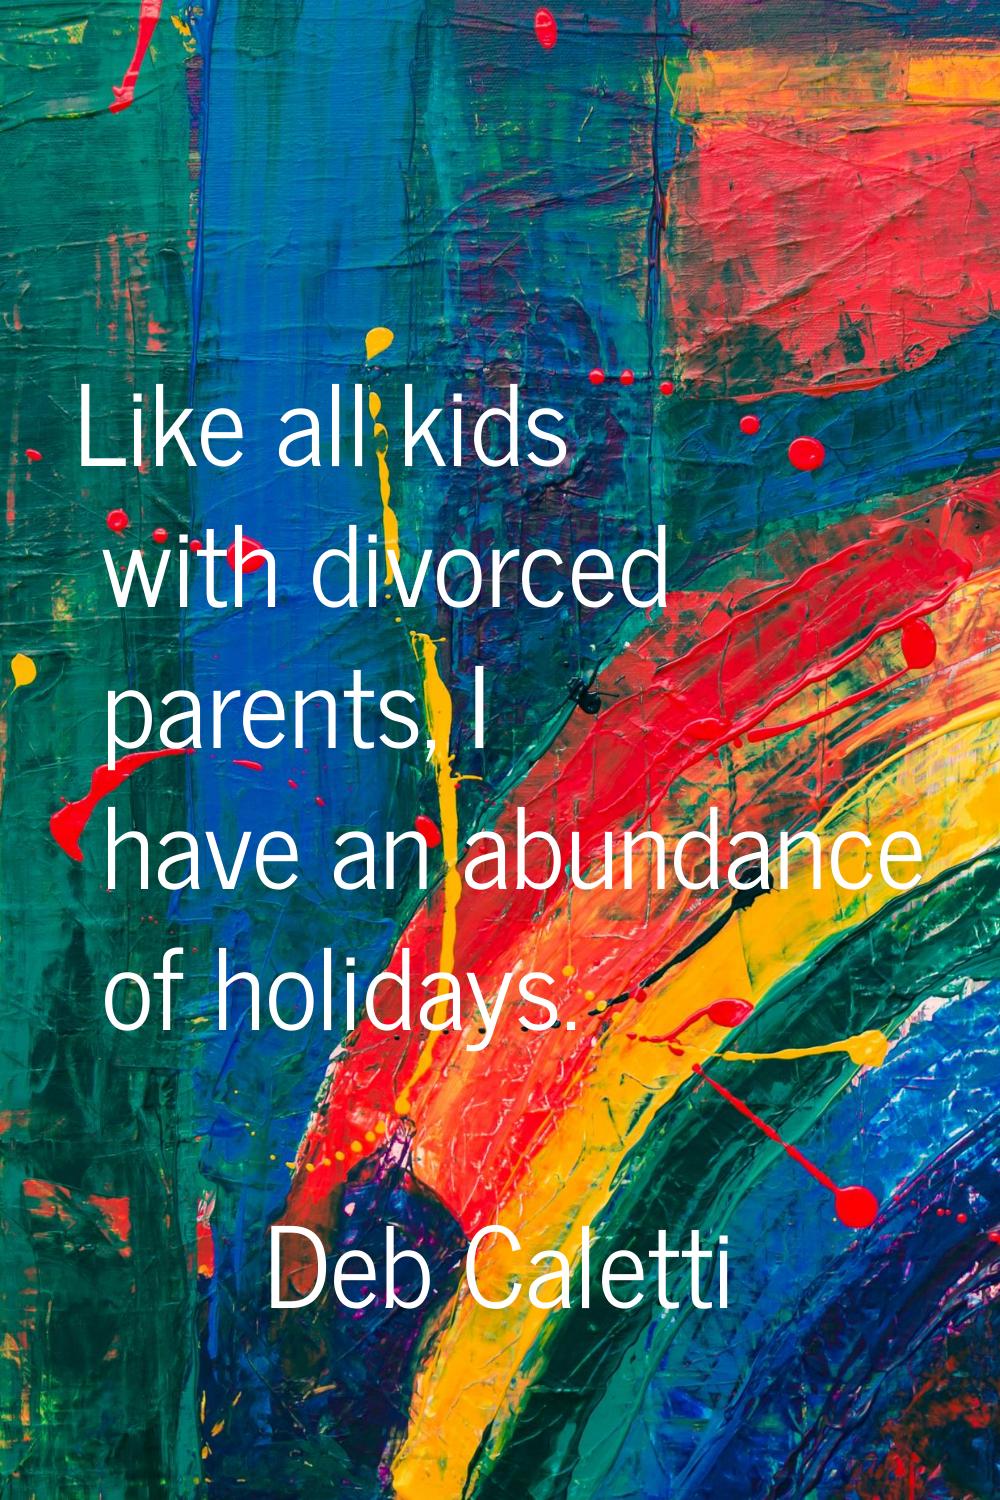 Like all kids with divorced parents, I have an abundance of holidays.